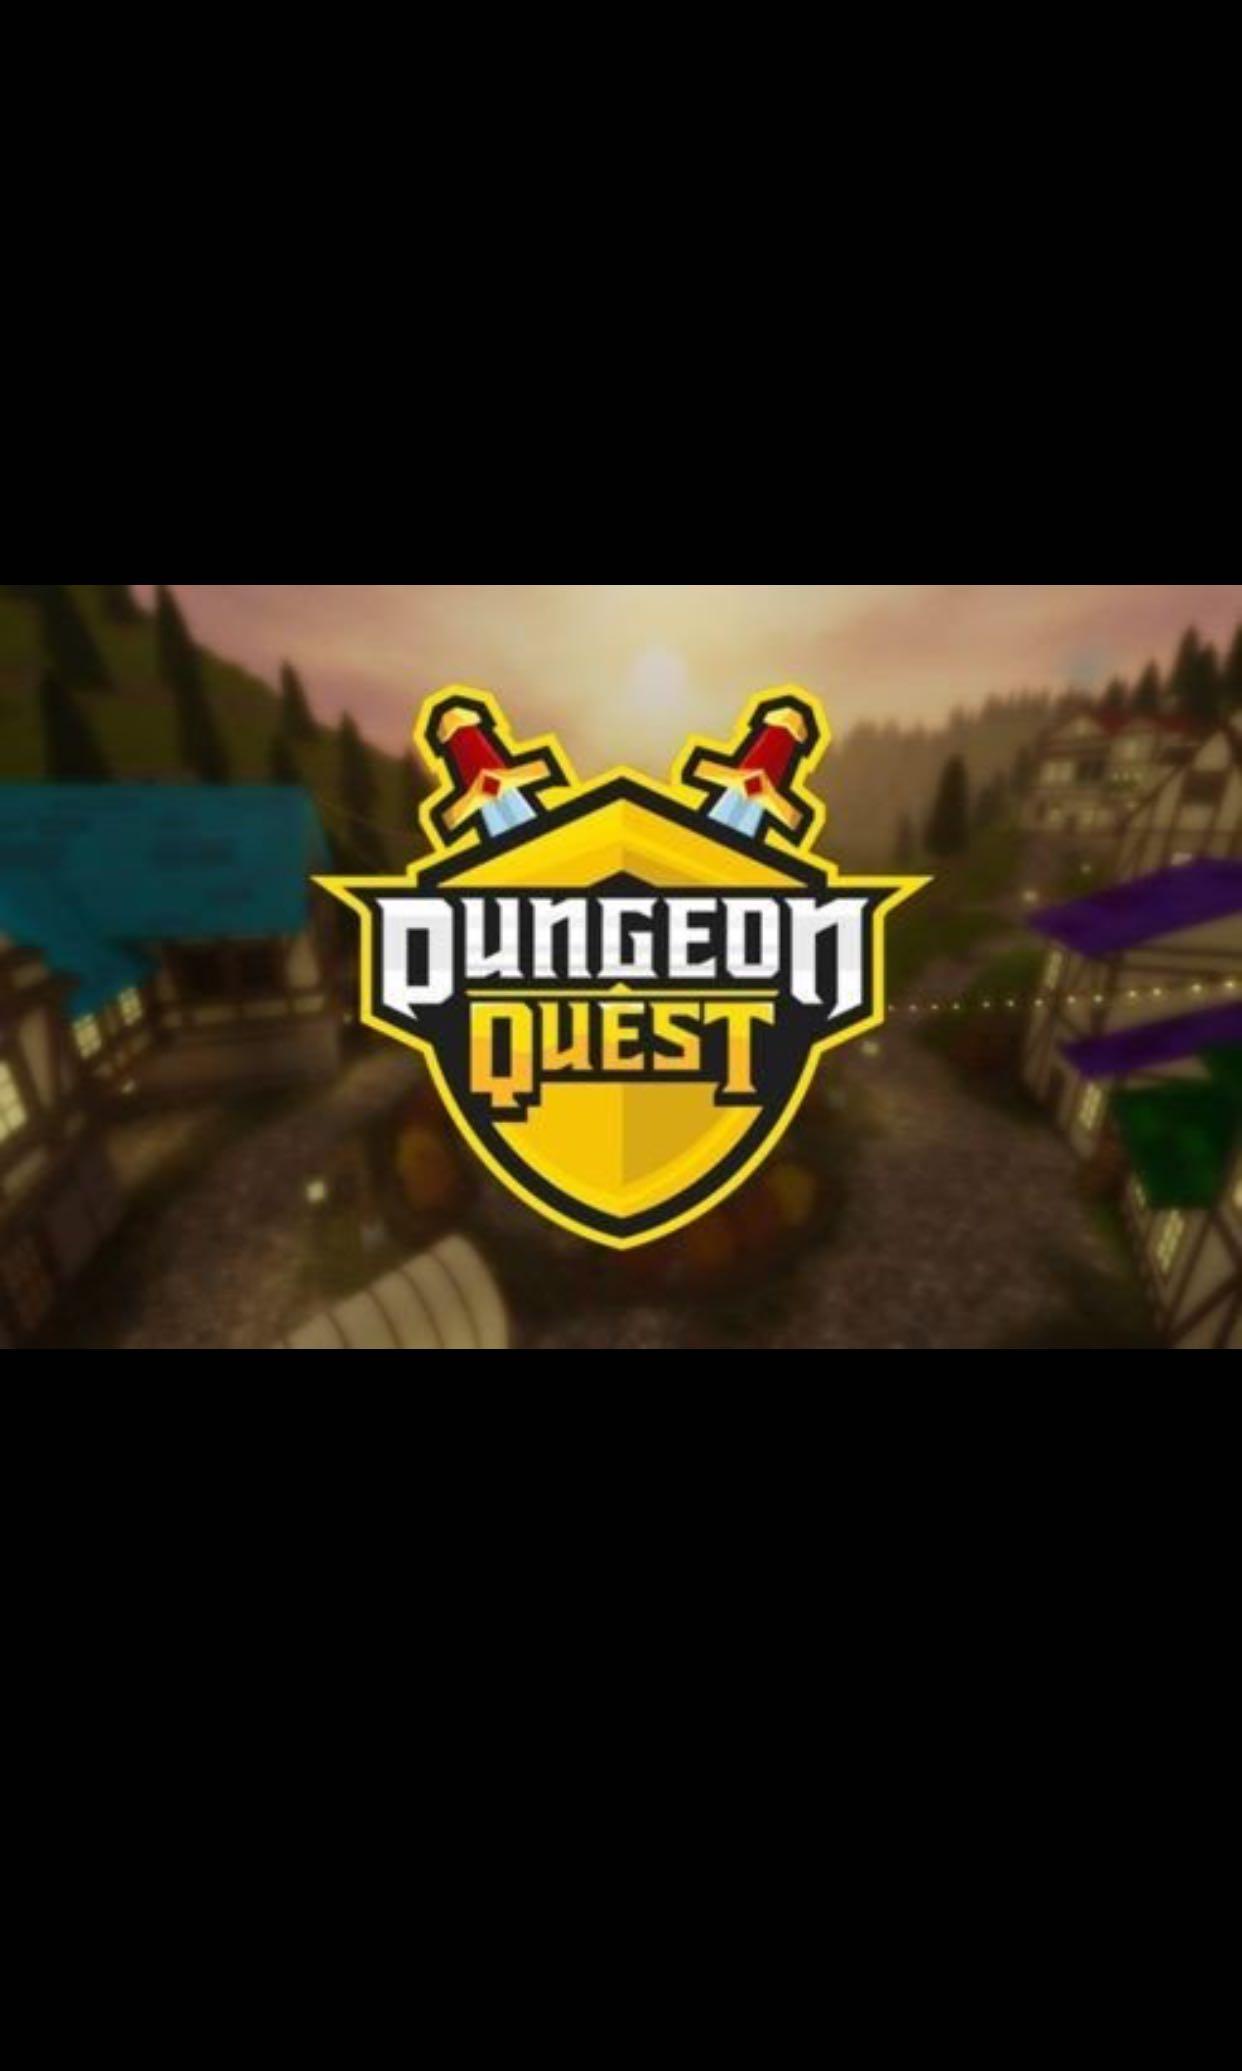 Dungeon Quest Carries Toys Games Video Gaming Video Games On Carousell - dungeon quest roblox free carries dungeon